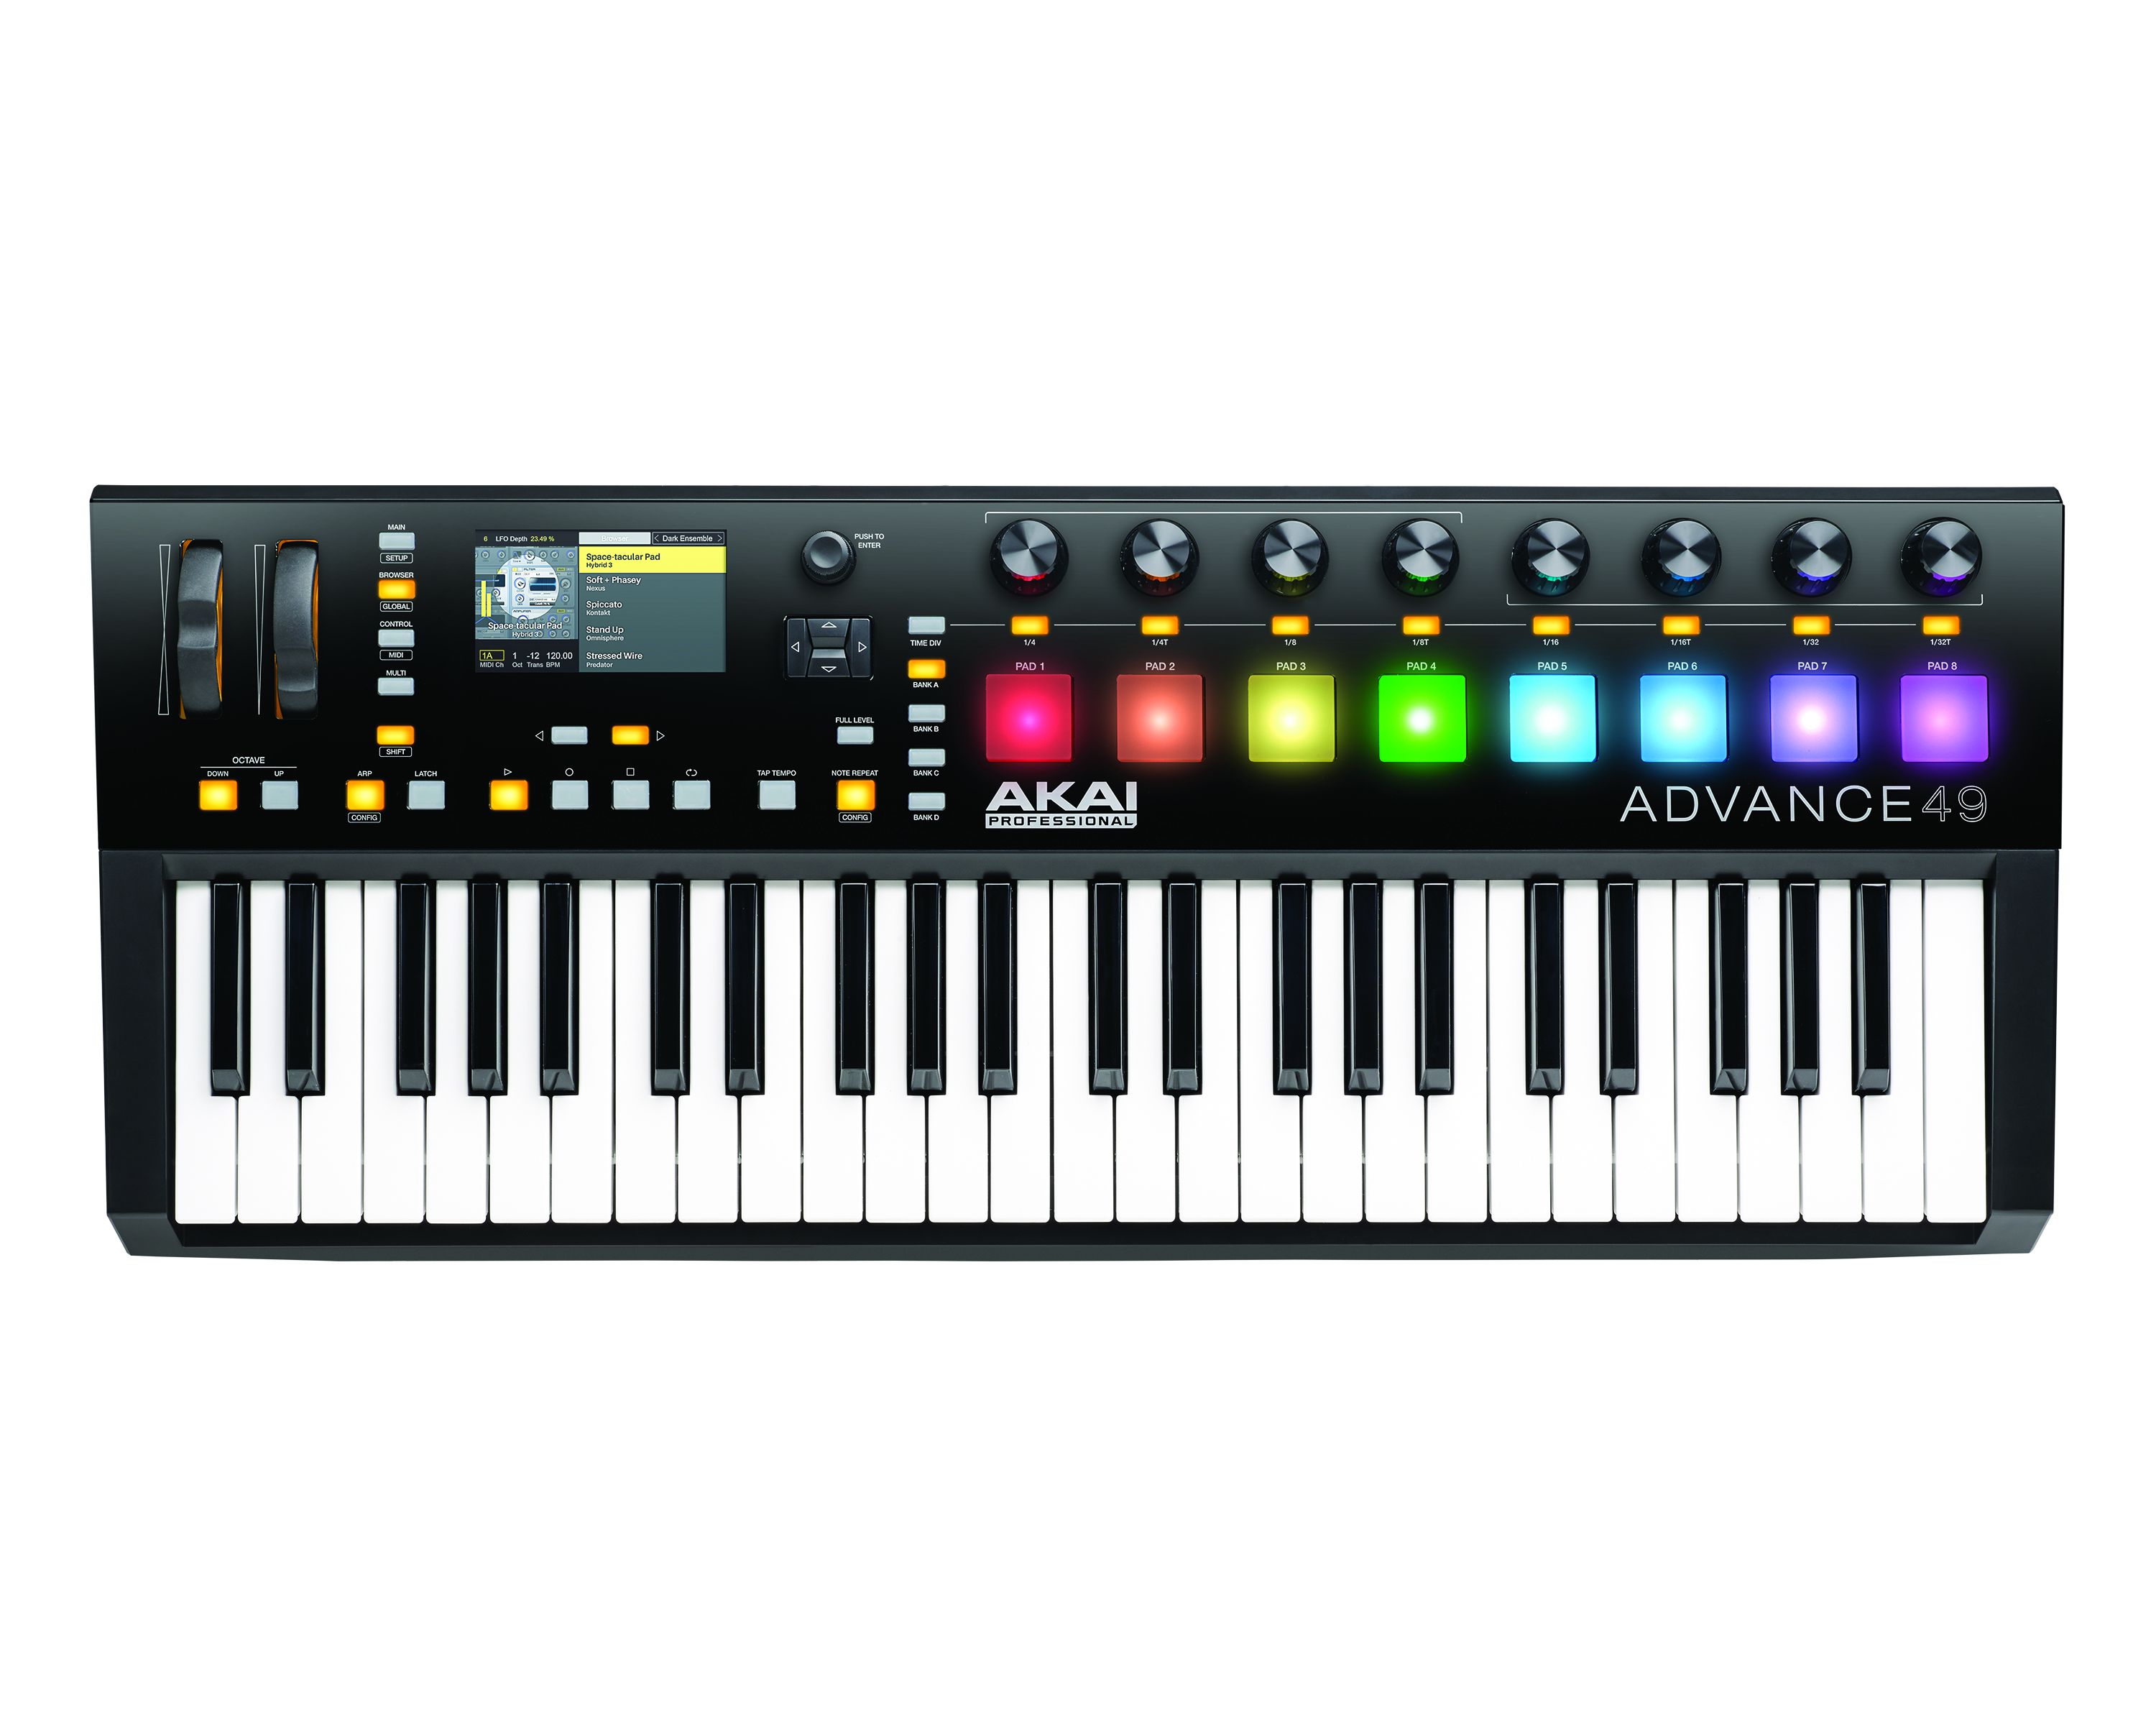 Second up is The Akai Pro Advance 49.